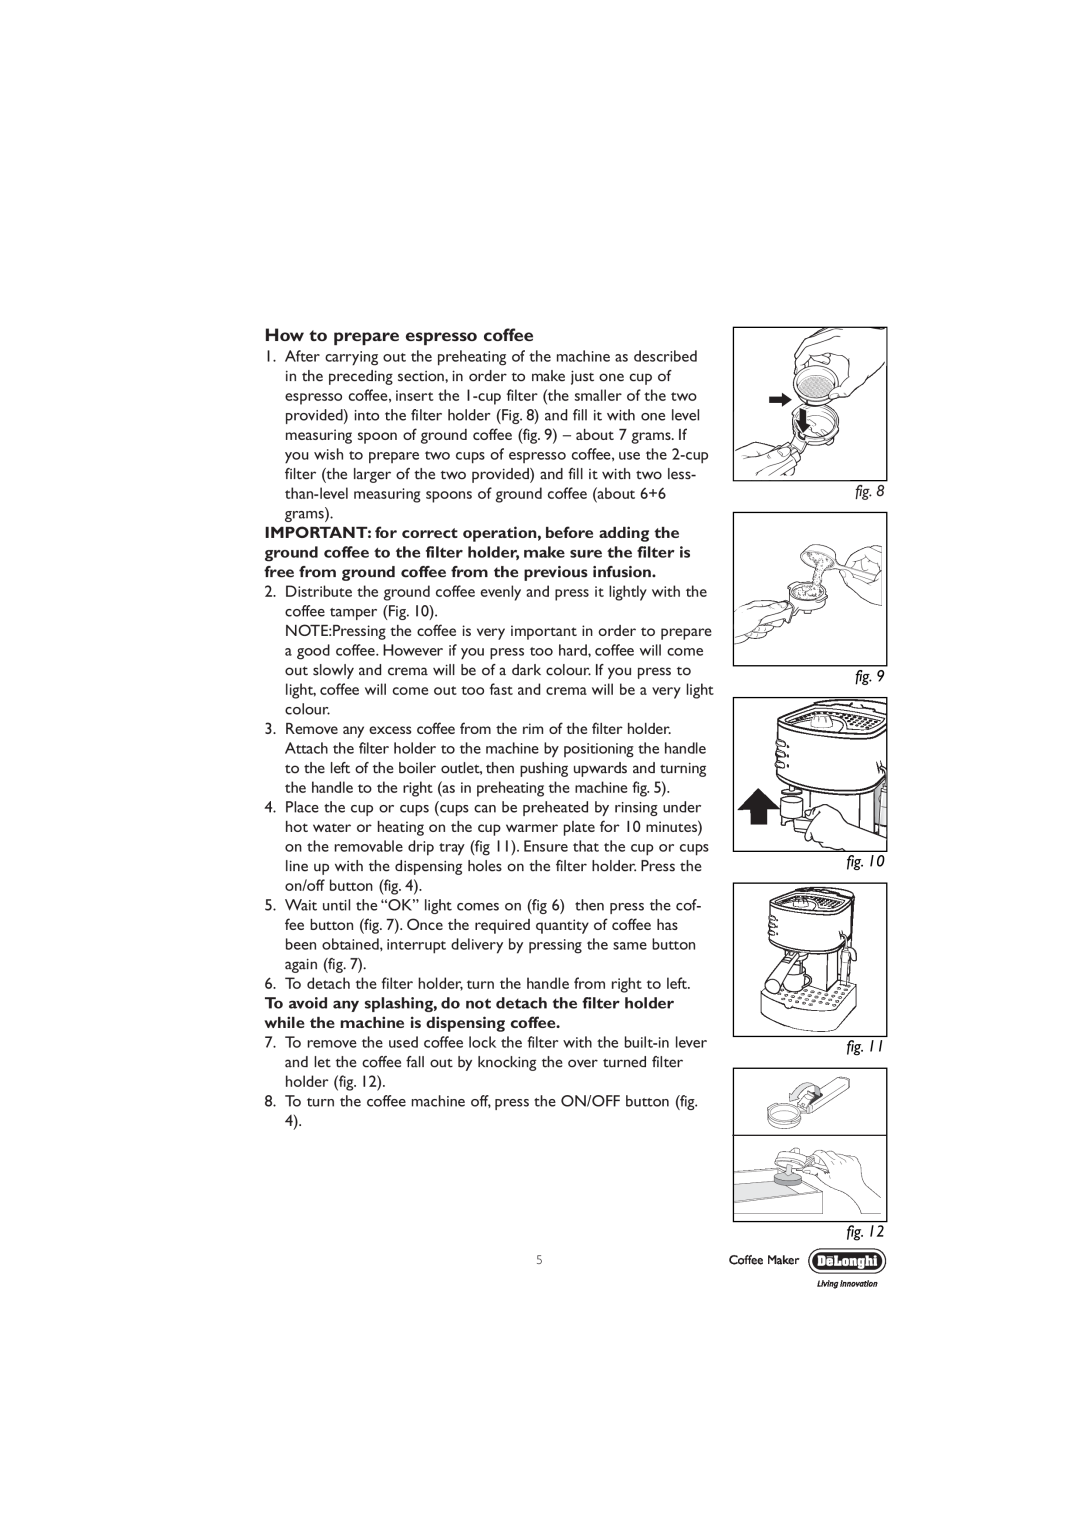 DeLonghi EC330S manual How to prepare espresso coffee, To detach the filter holder, turn the handle from right to left 